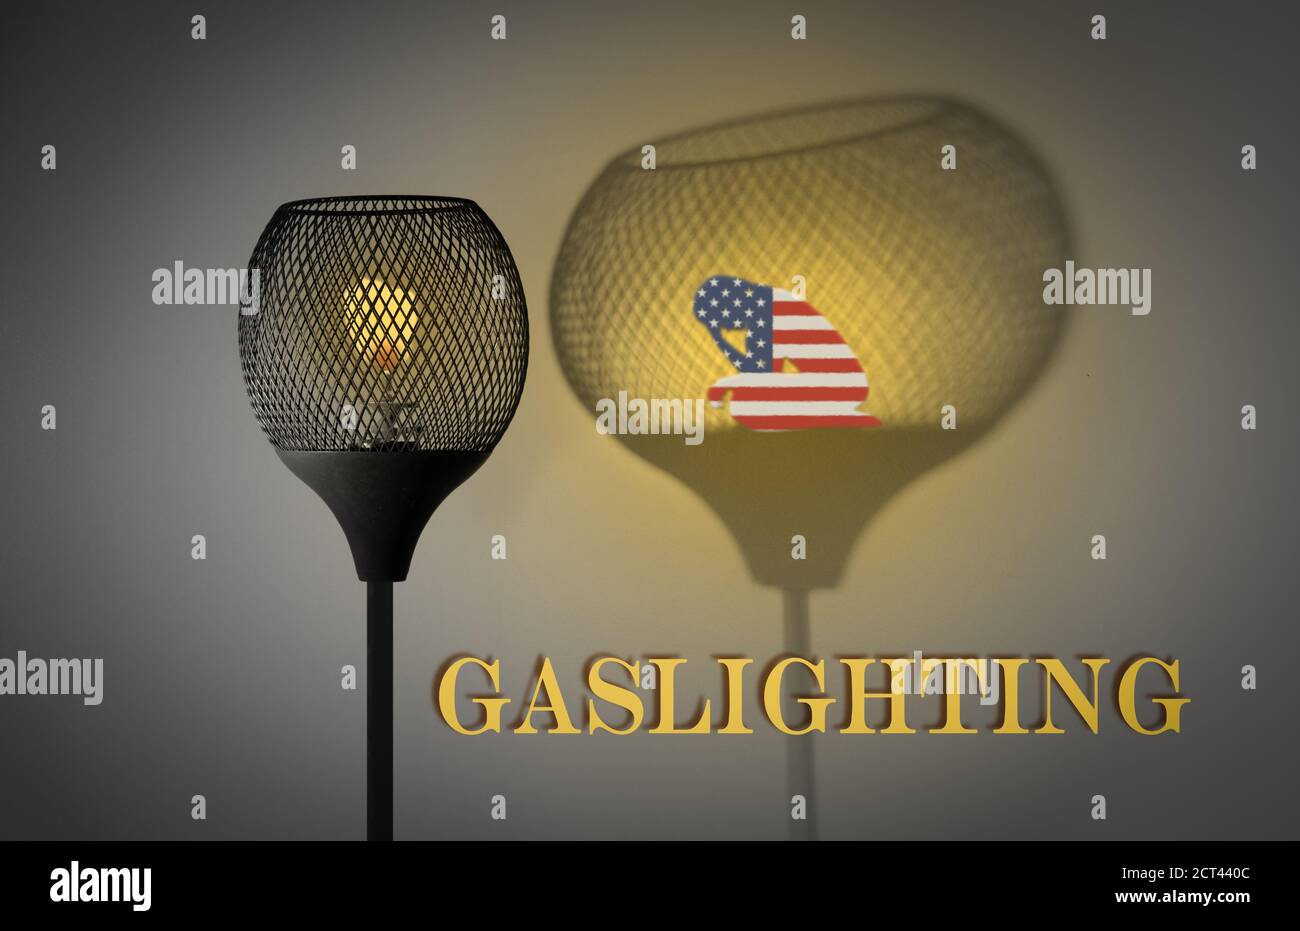 Gaslight with silhouette of woman draped in American flag in shadow cast by the lamp, Gaslighting text, concept illustration Stock Photo